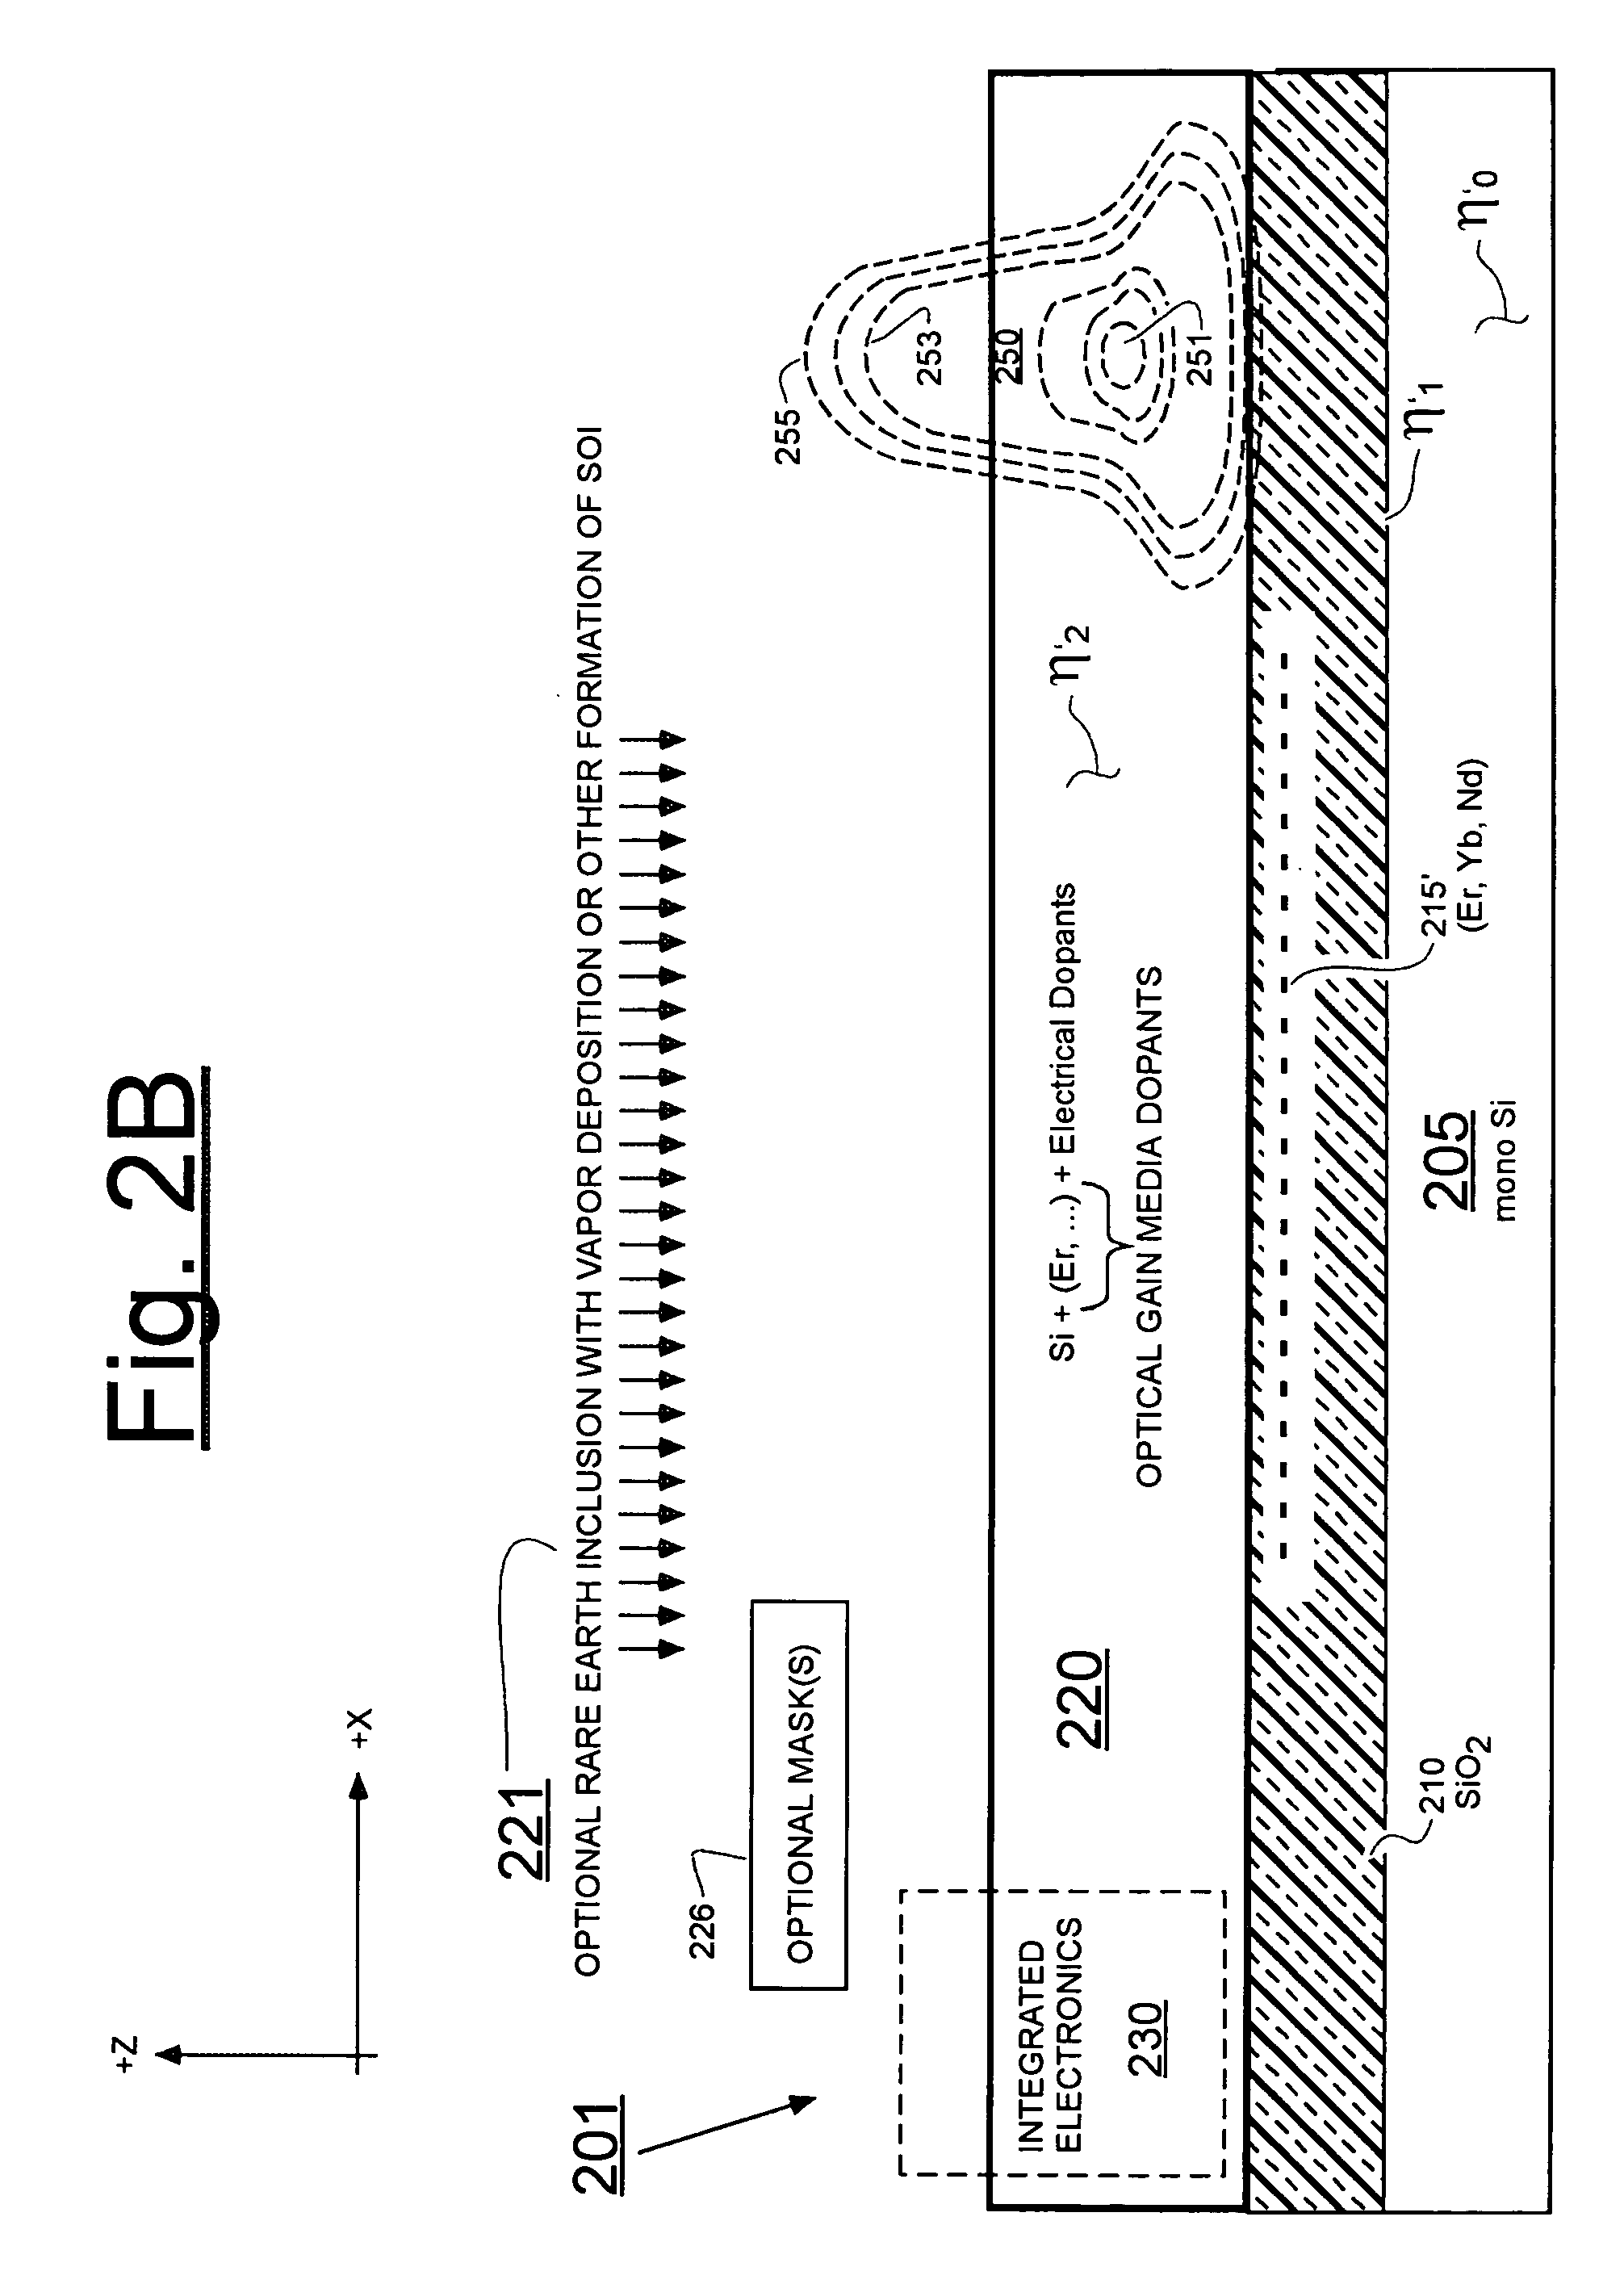 Integration of rare-earth doped amplifiers into semiconductor structures and uses of same